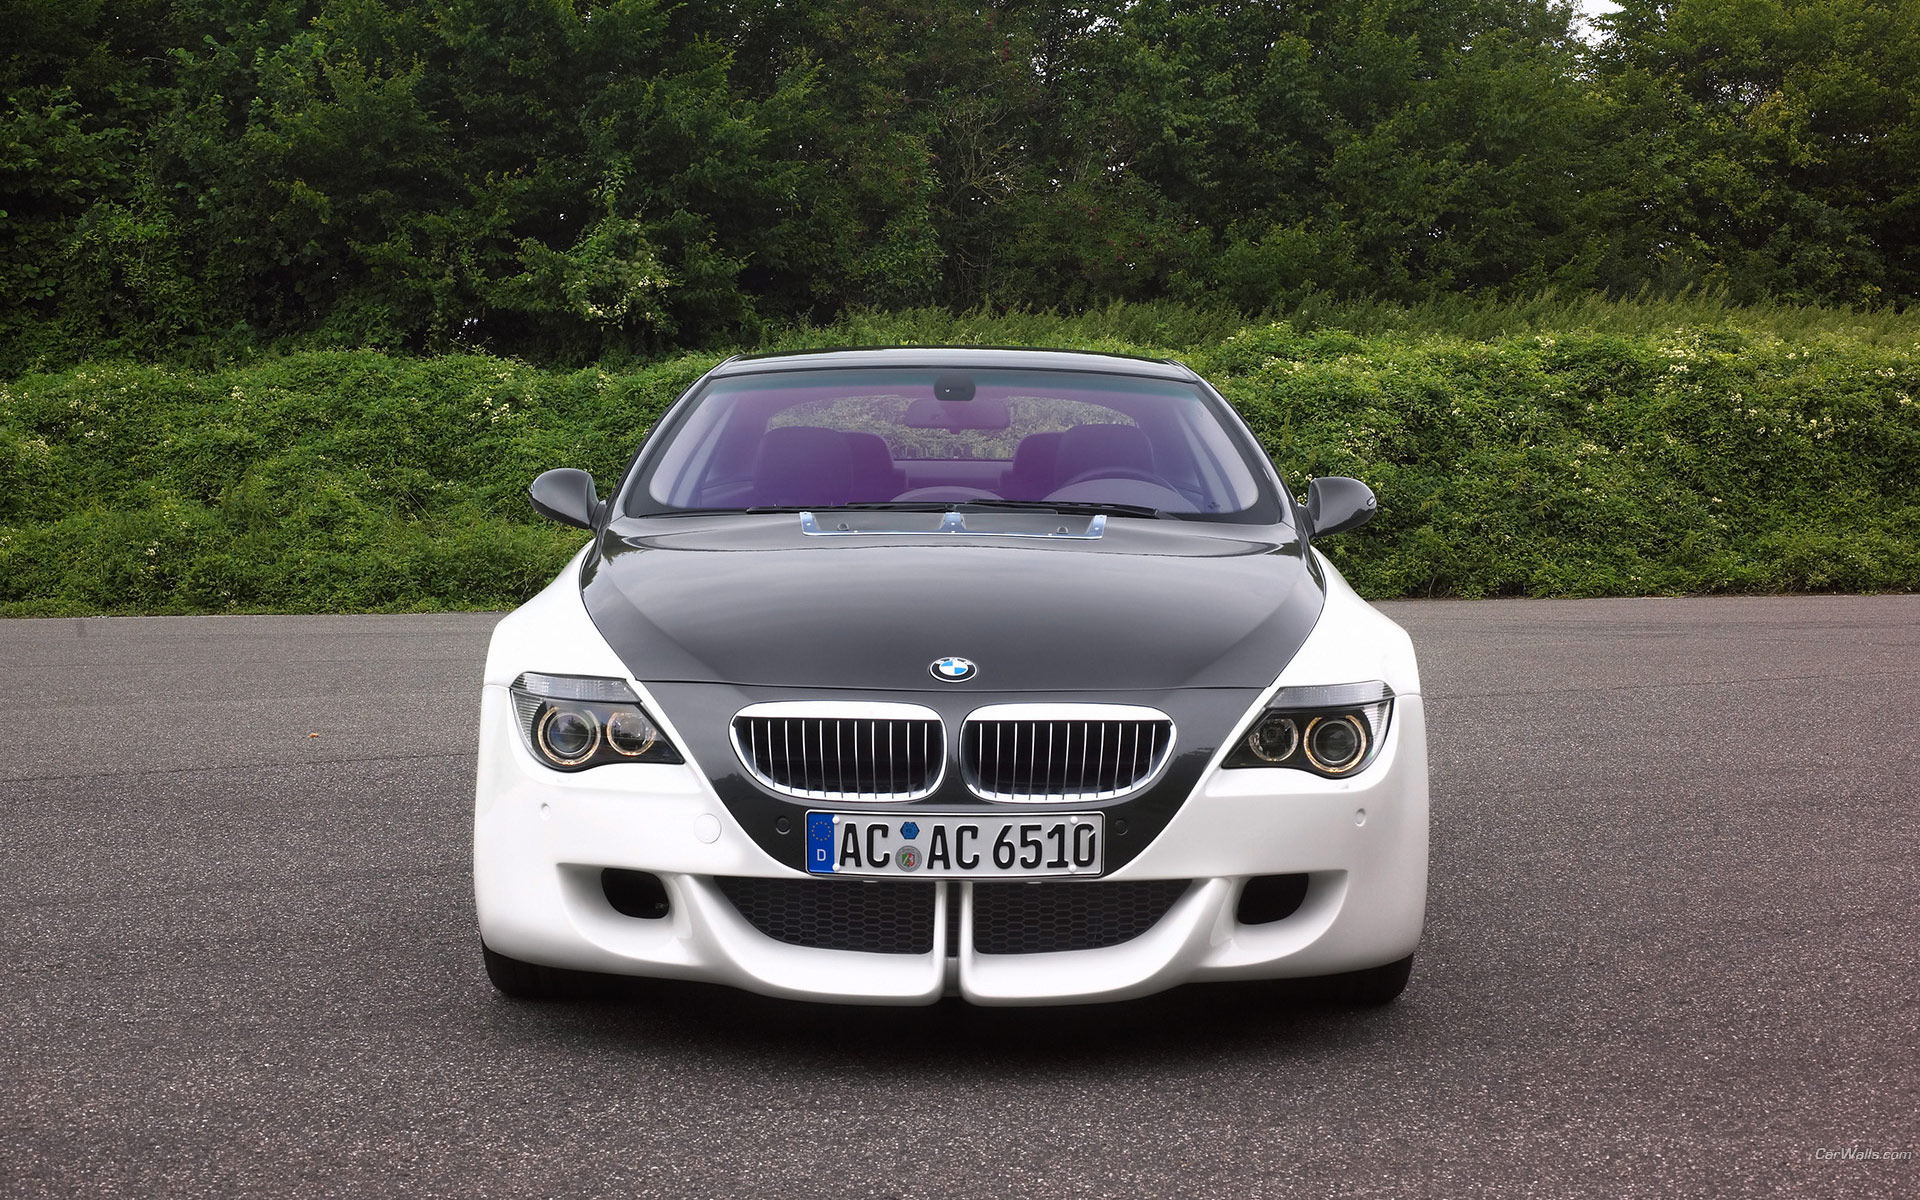 Download HQ 6 tension front Bmw wallpaper / 1920x1200